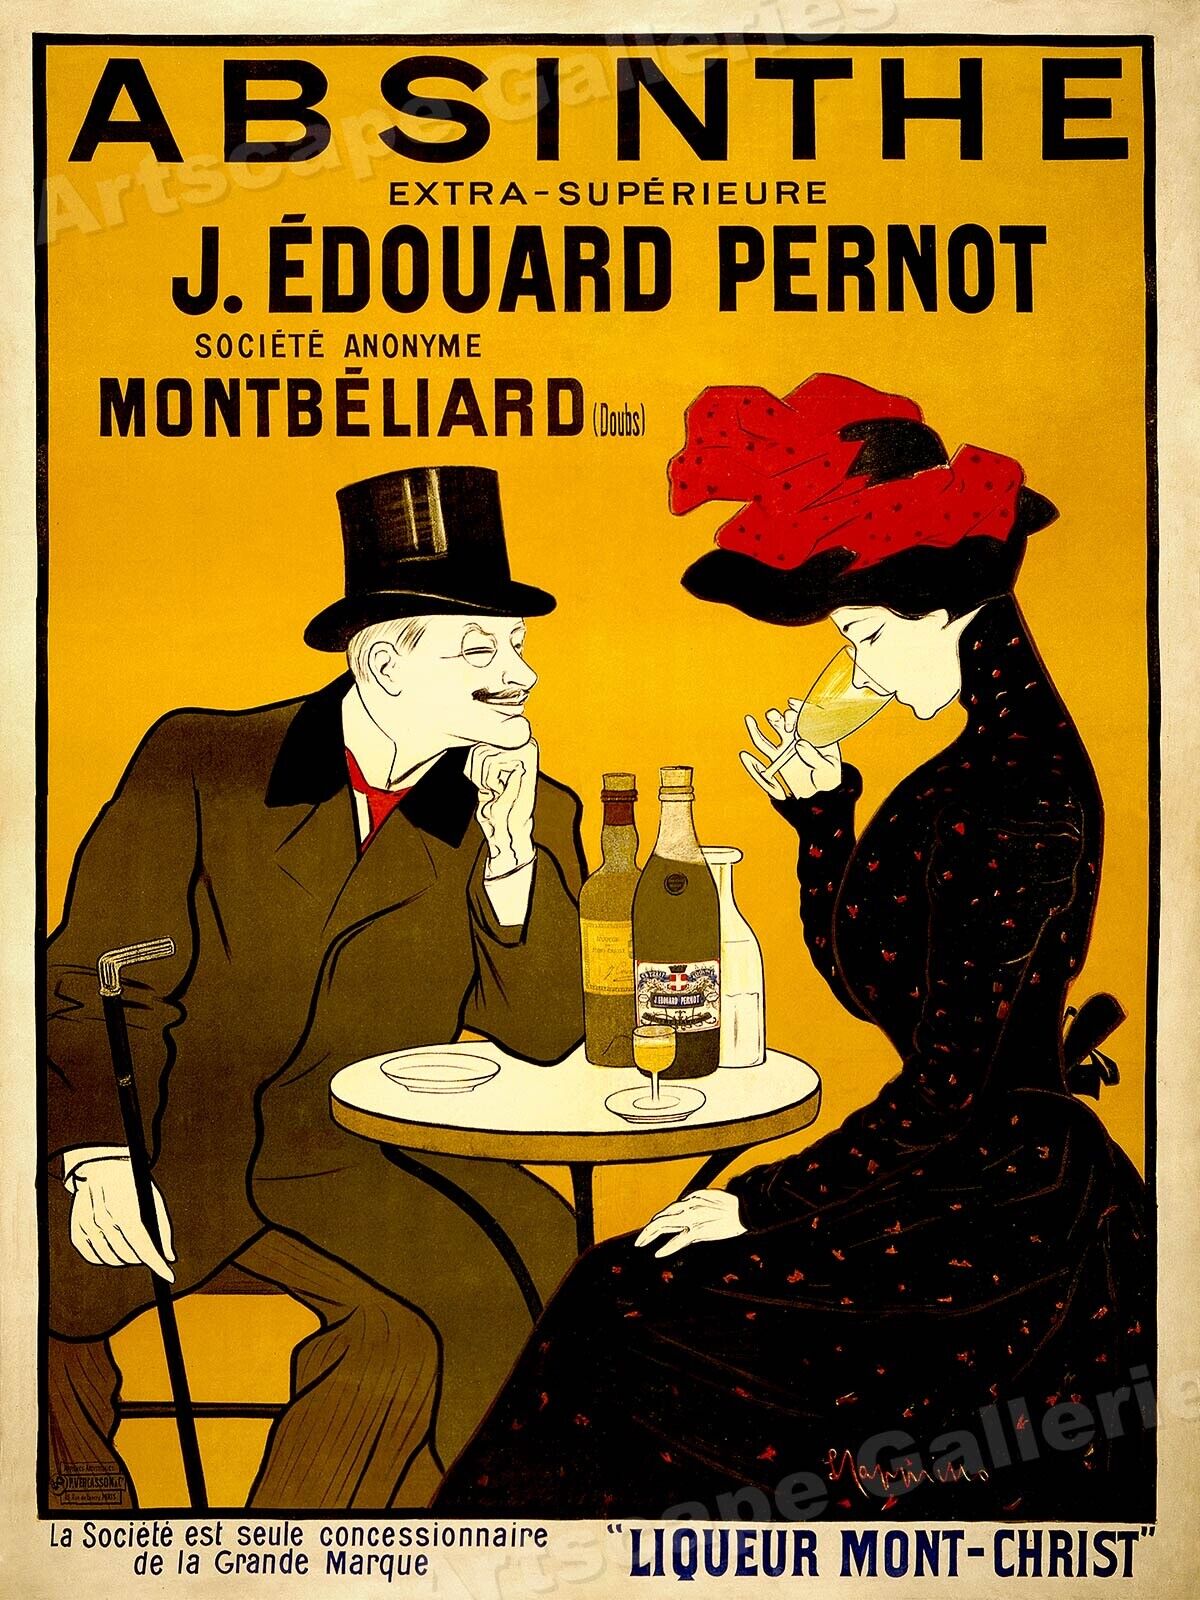 1905 Absinthe Table Vintage Alcohol Advertising Poster - 18x24